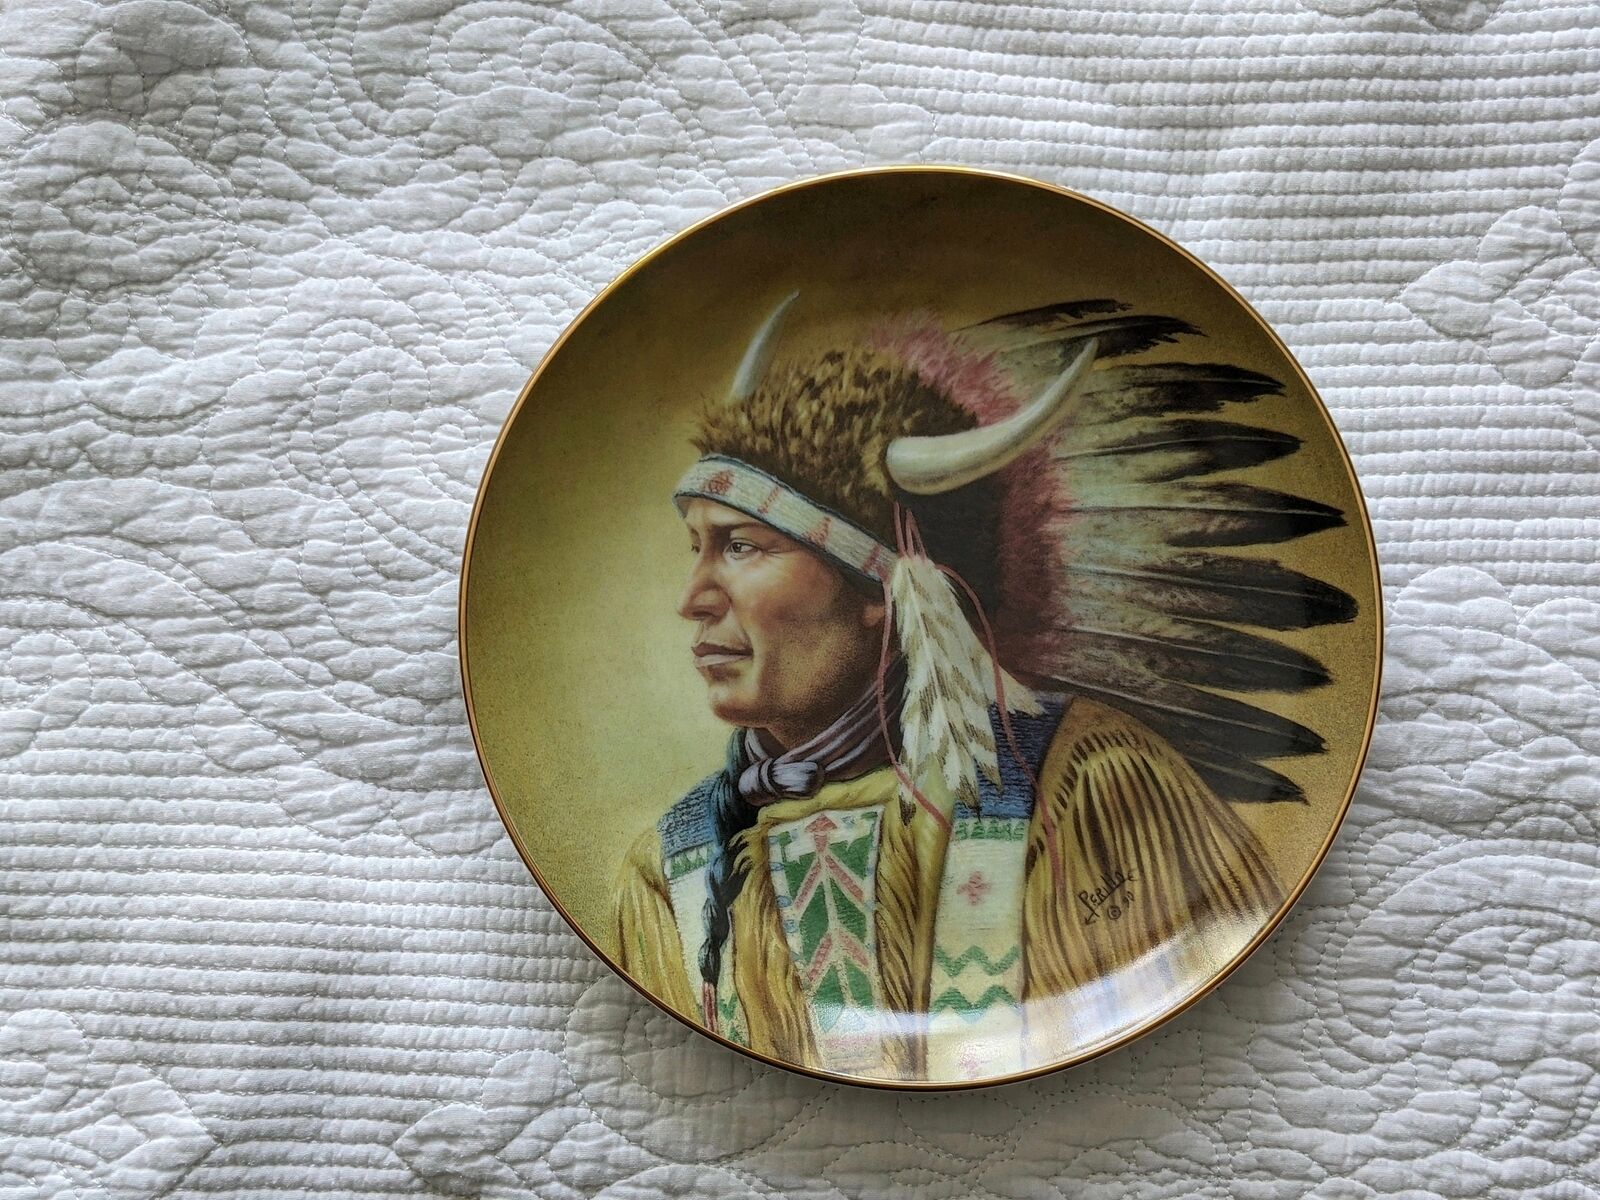 Collector Plate, Vintage “Nobility of the Algonquin” 1991 by Perillo